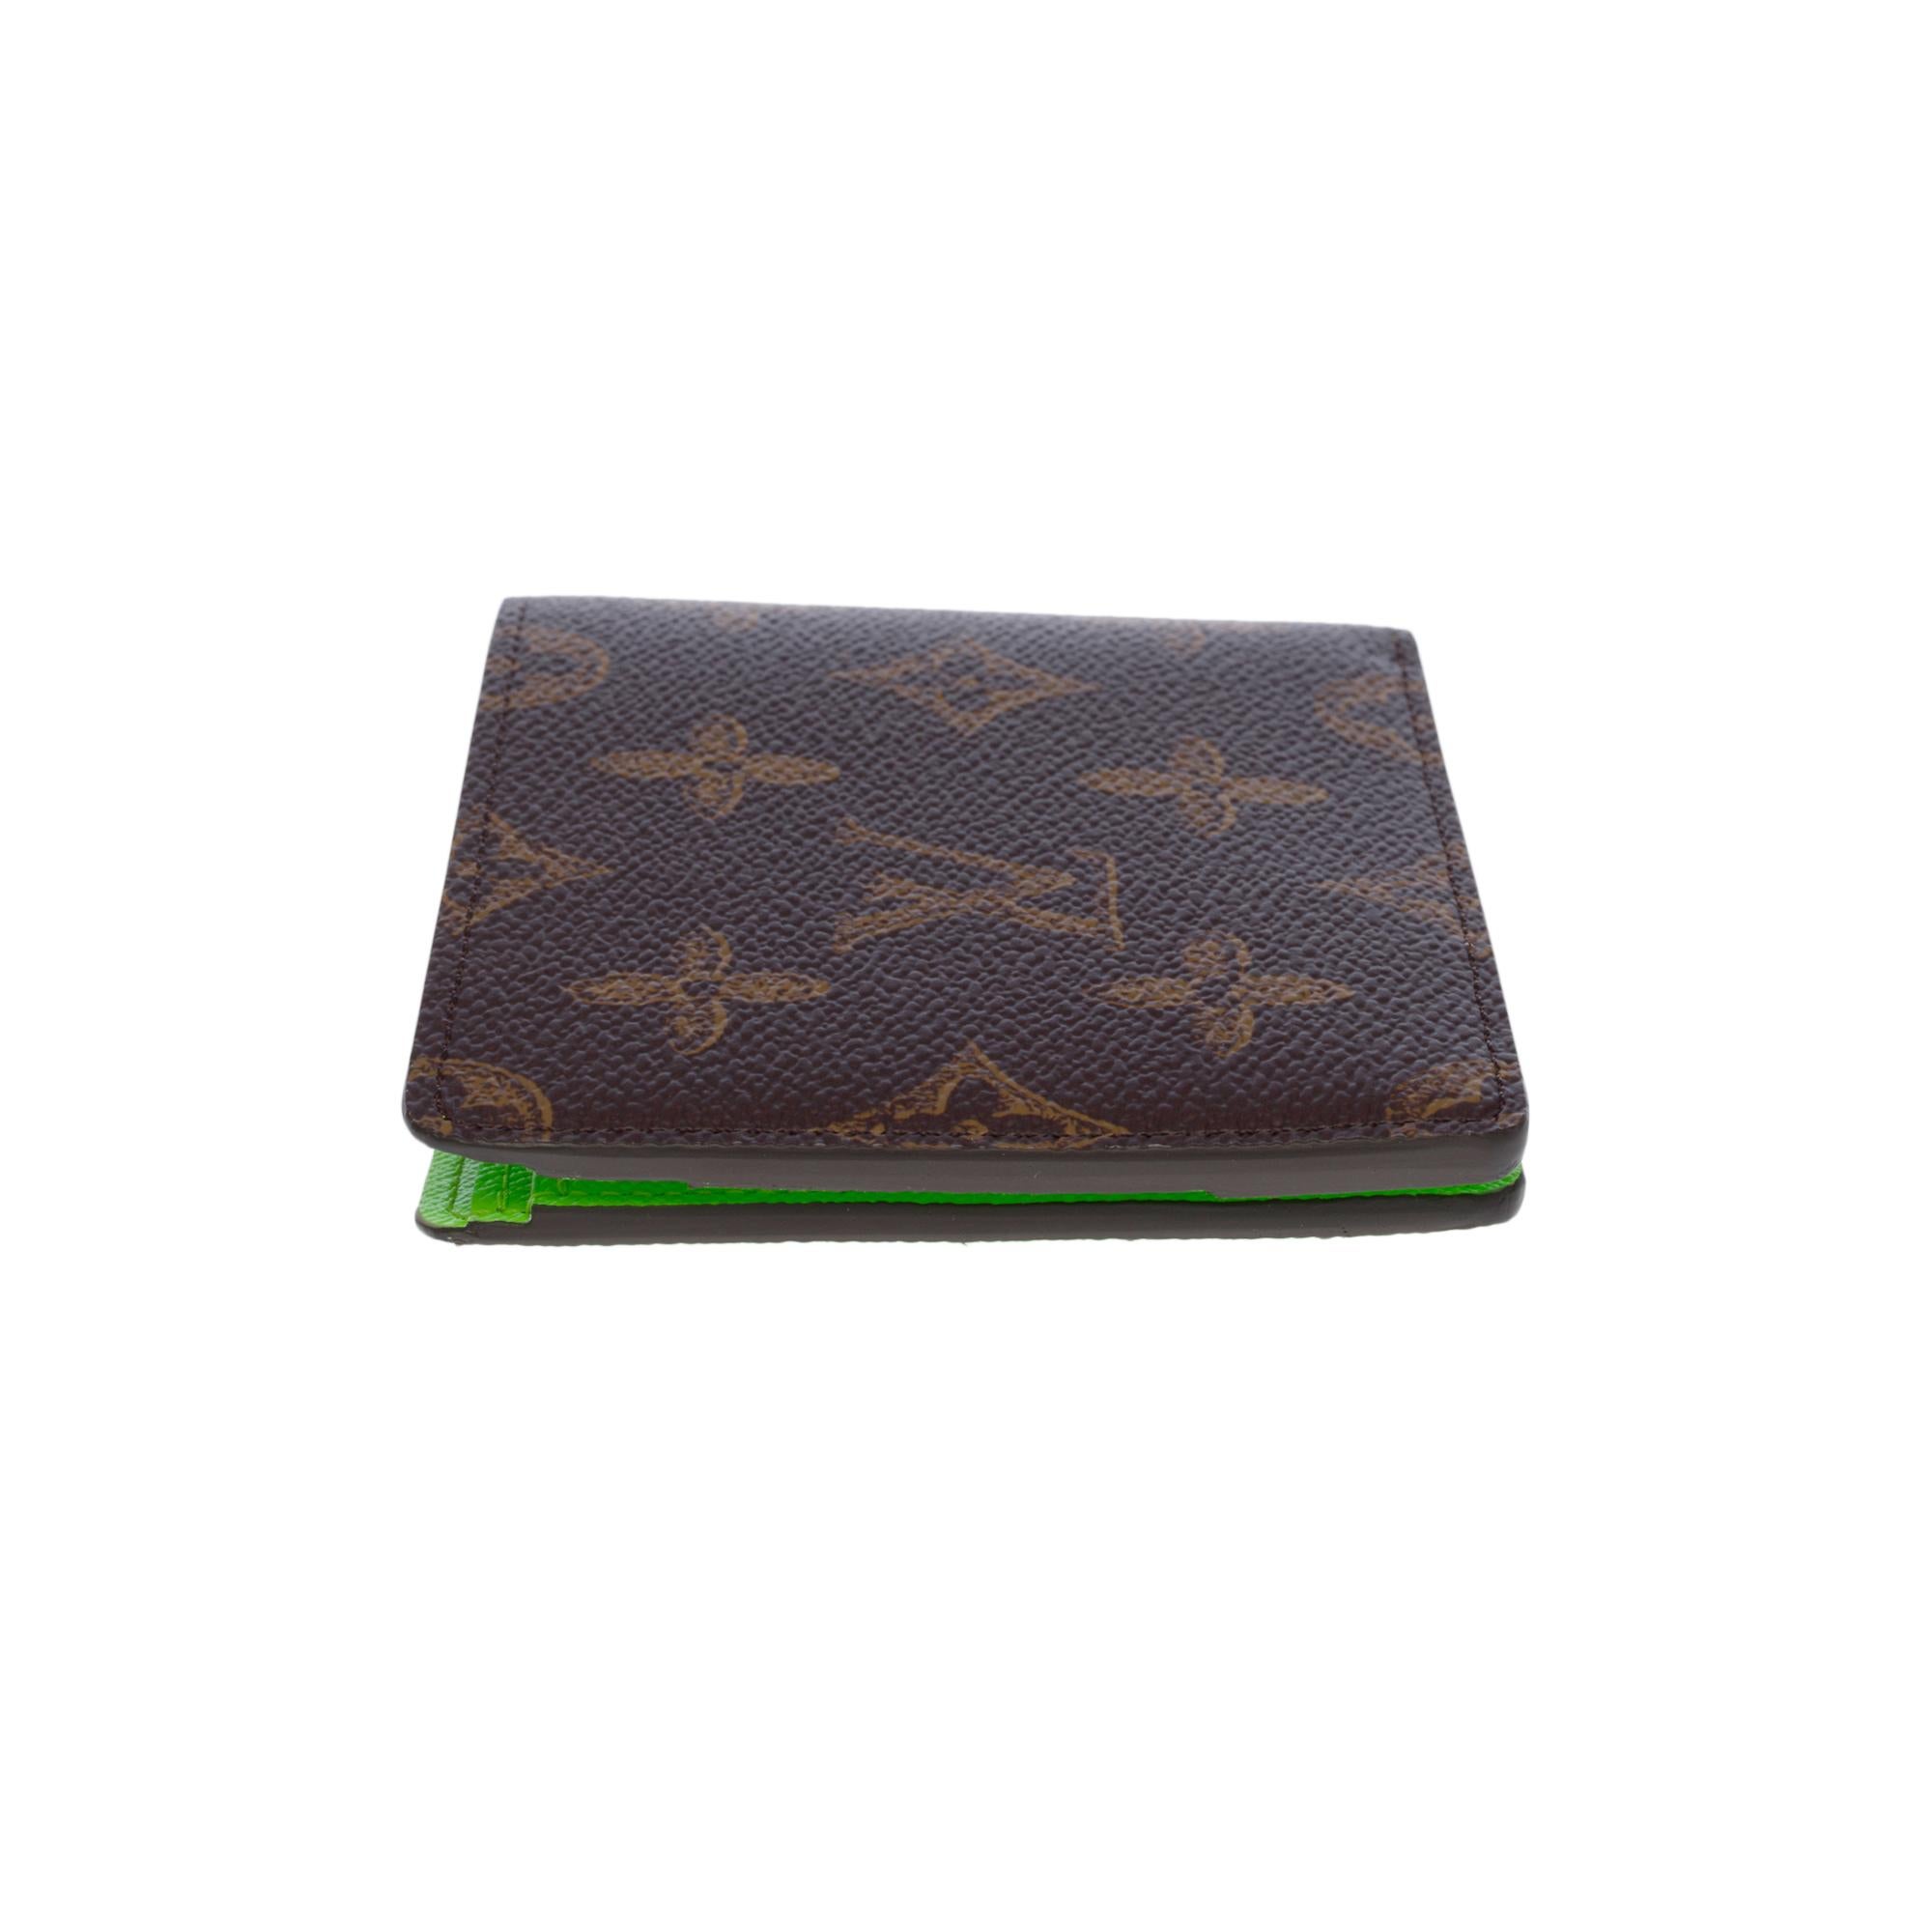 Women's or Men's New-Virgil Abloh FW 2022-Multiple Wallet N°7 in brown canvas an green leather